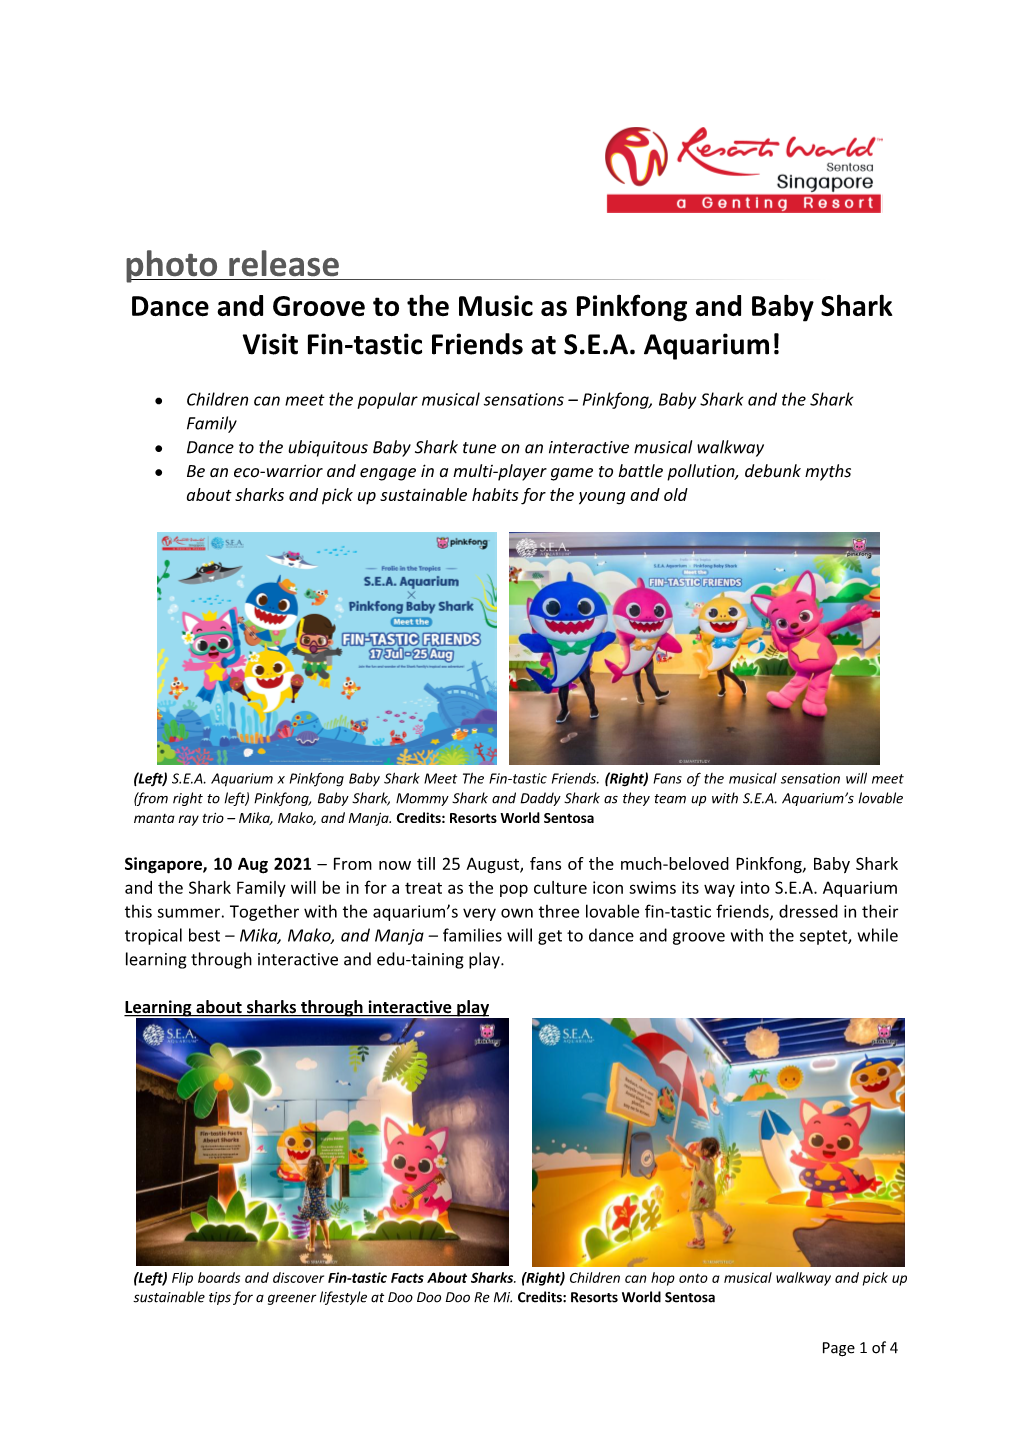 Photo Release Dance and Groove to the Music As Pinkfong and Baby Shark Visit Fin-Tastic Friends at S.E.A